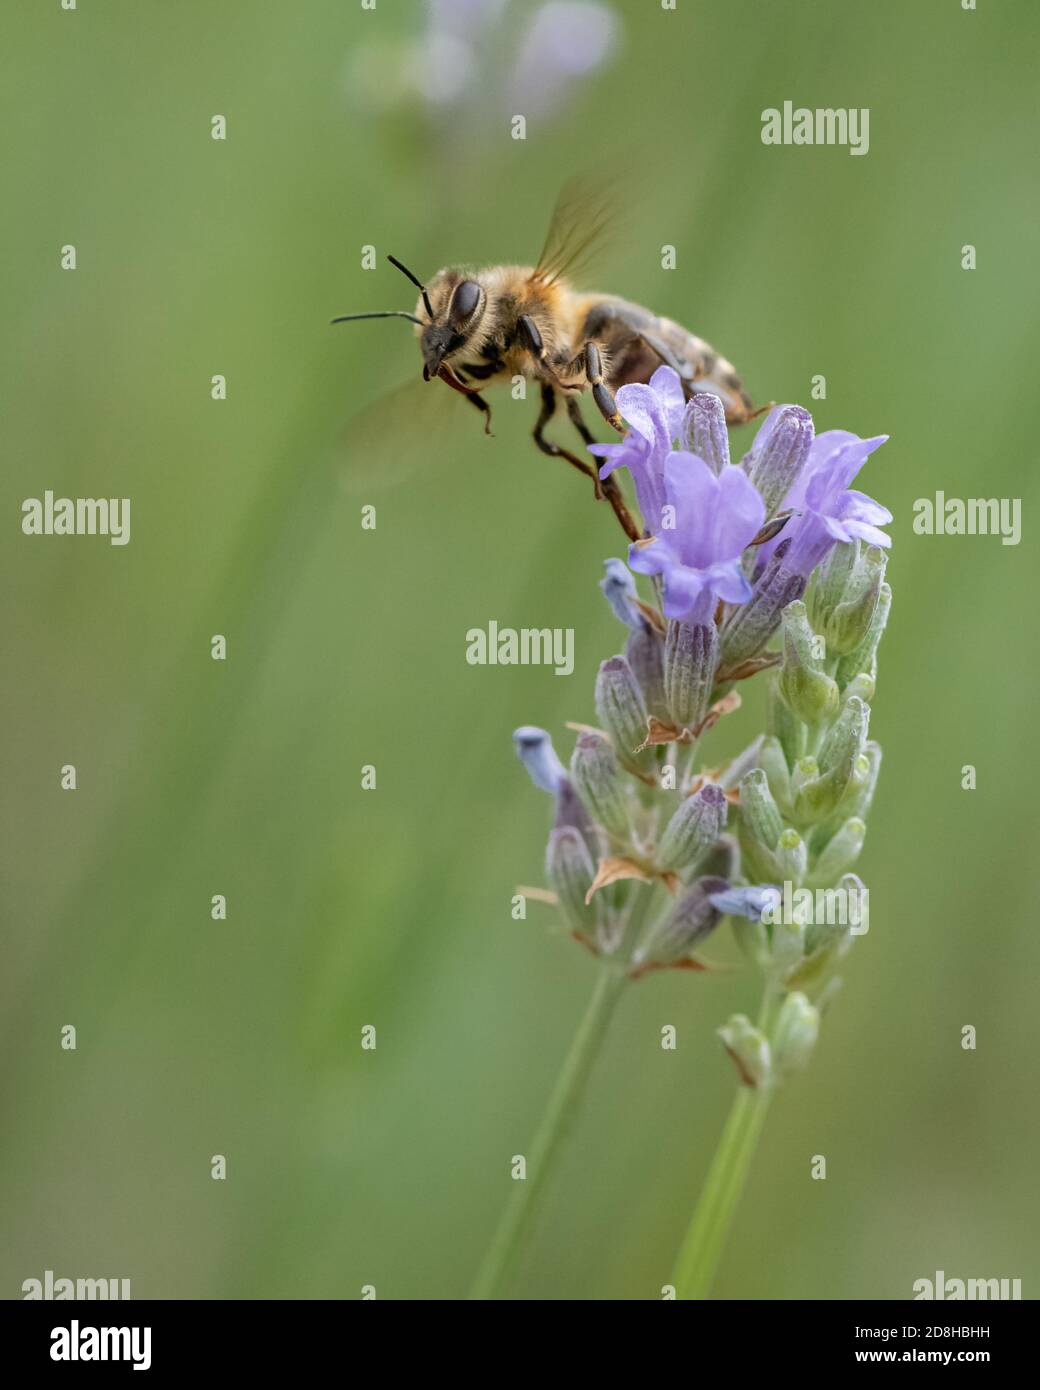 A honey bee flies from a spica lavender flower in search of pollen. Stock Photo